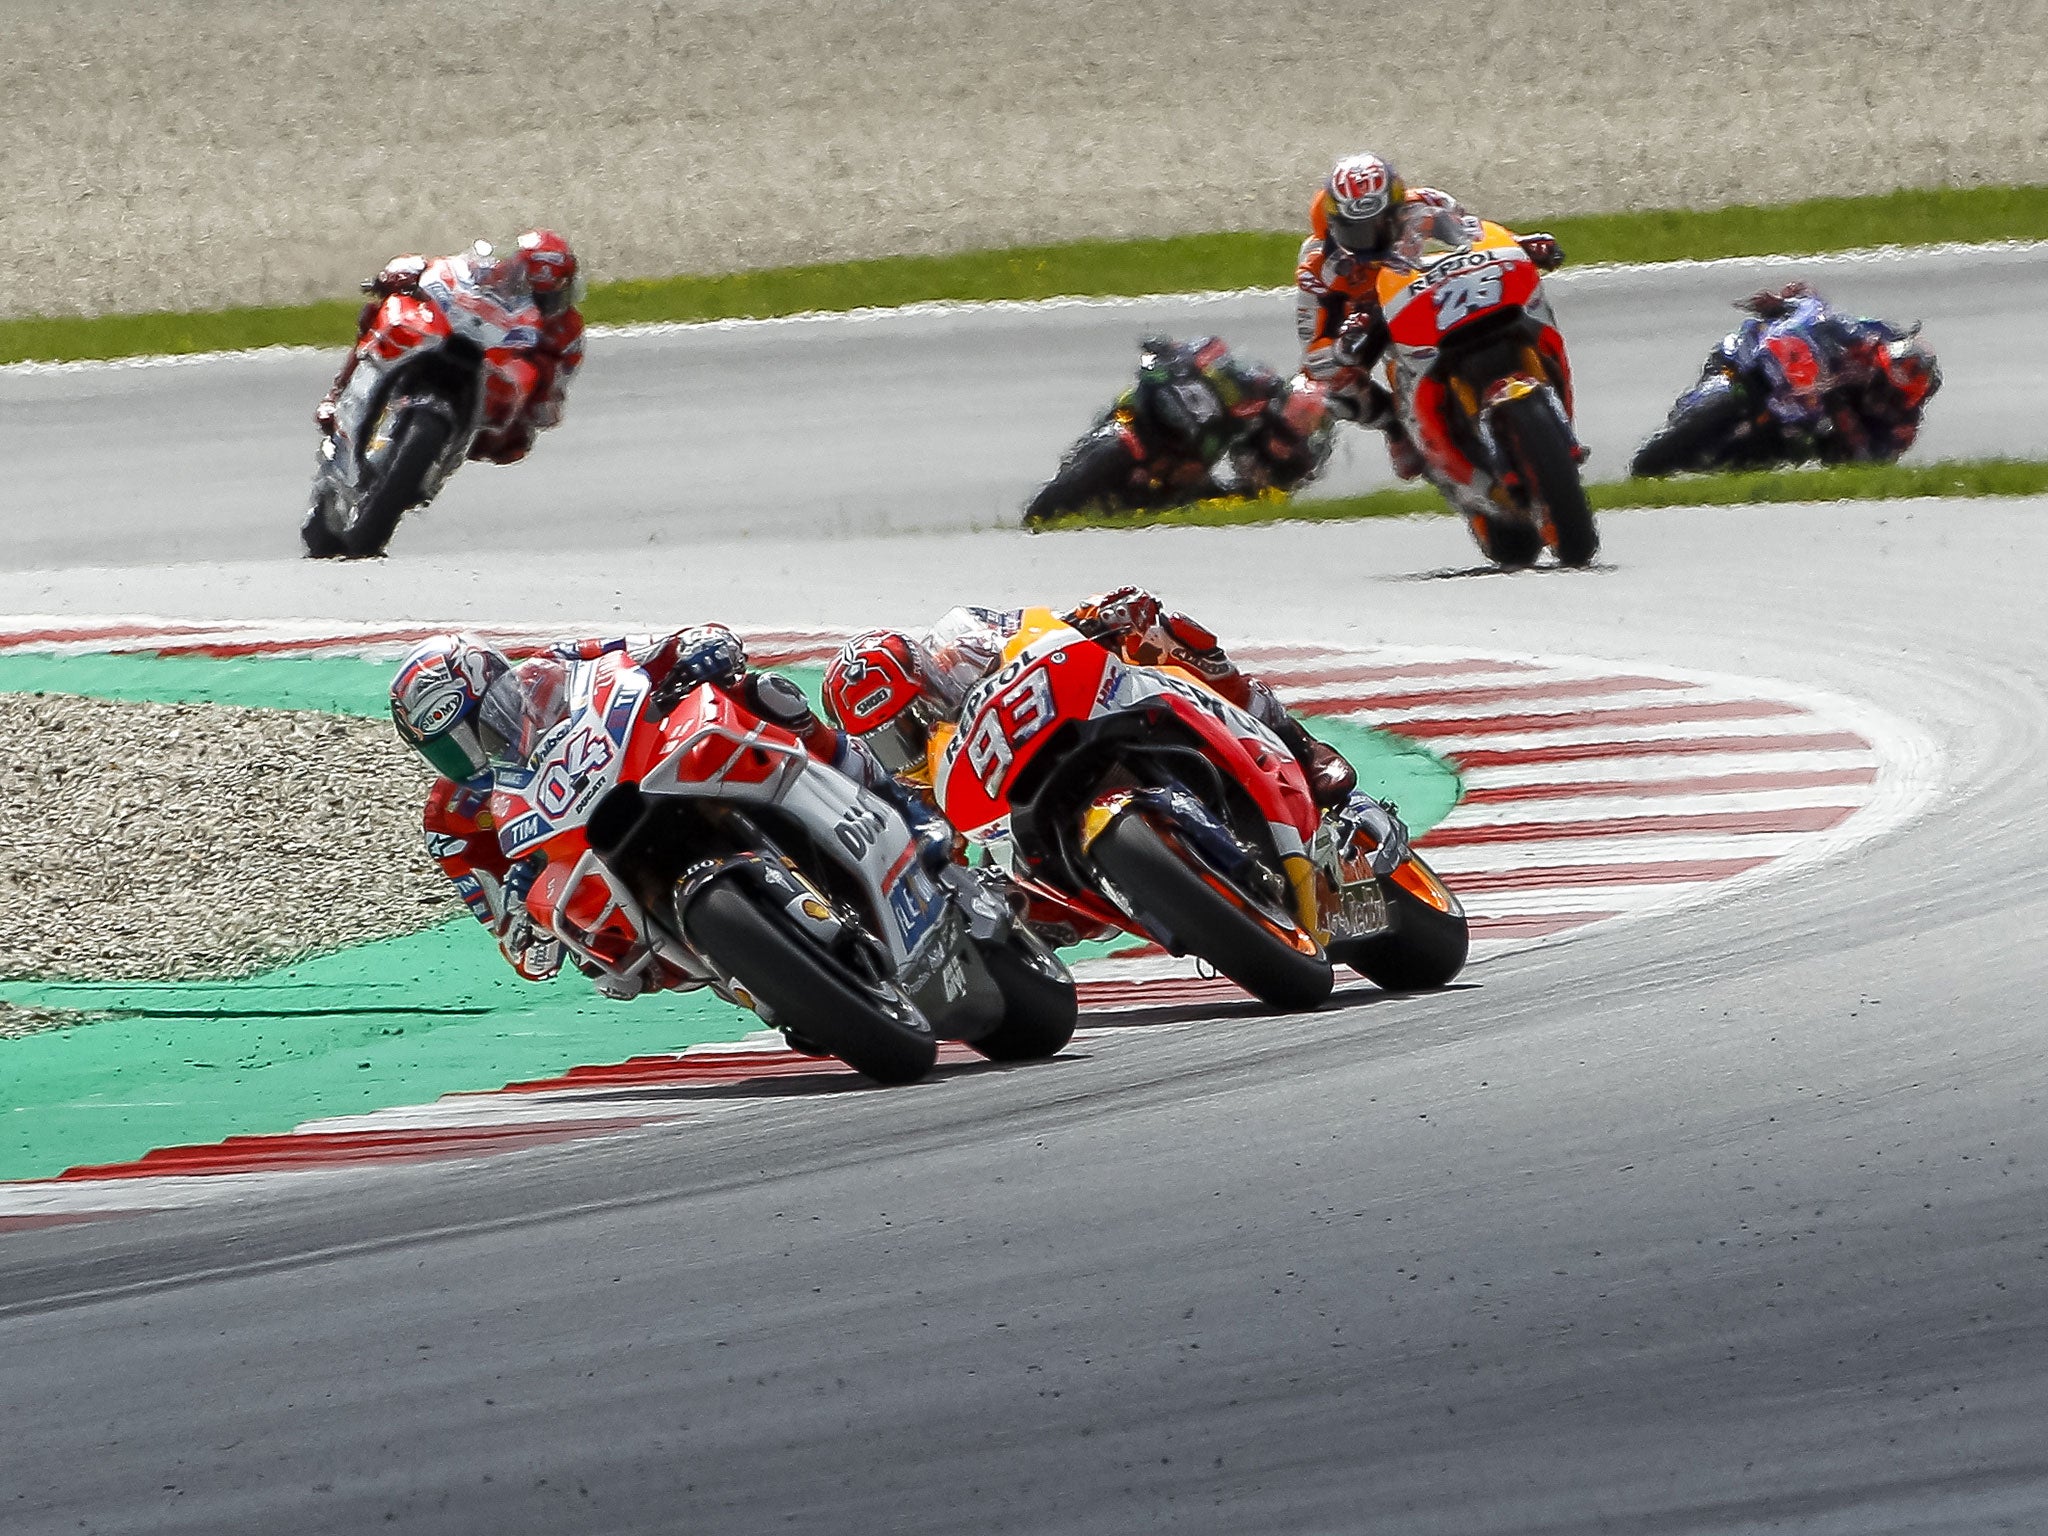 Dovizioso held off a last-lap charge from Marquez